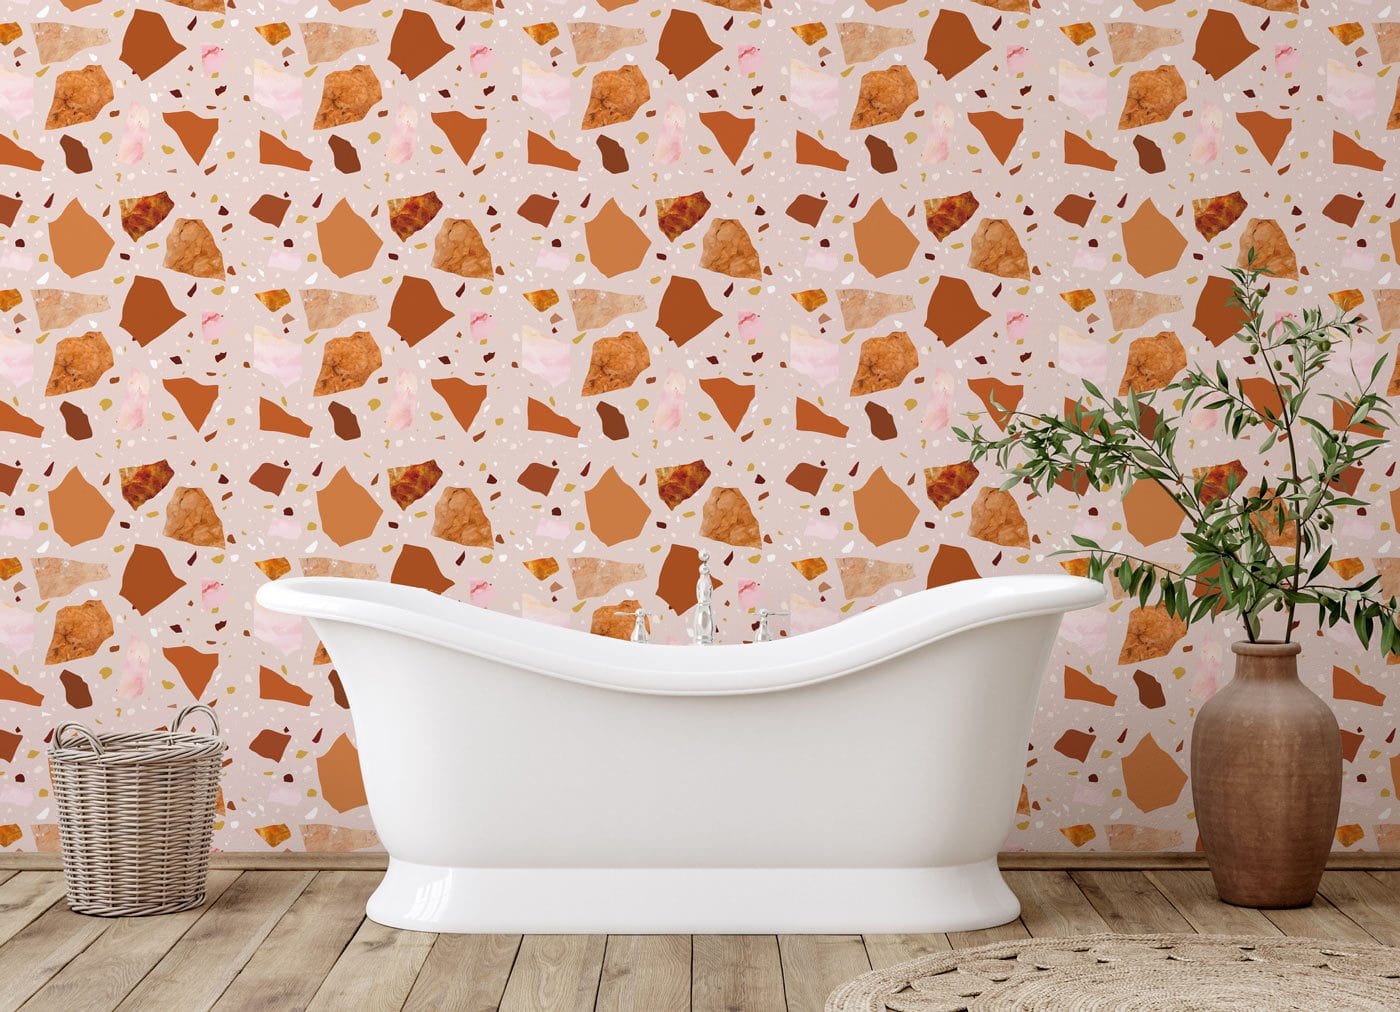 Wallpaper mural with a terrazzo and marble design in orange for the bathroom's decor.